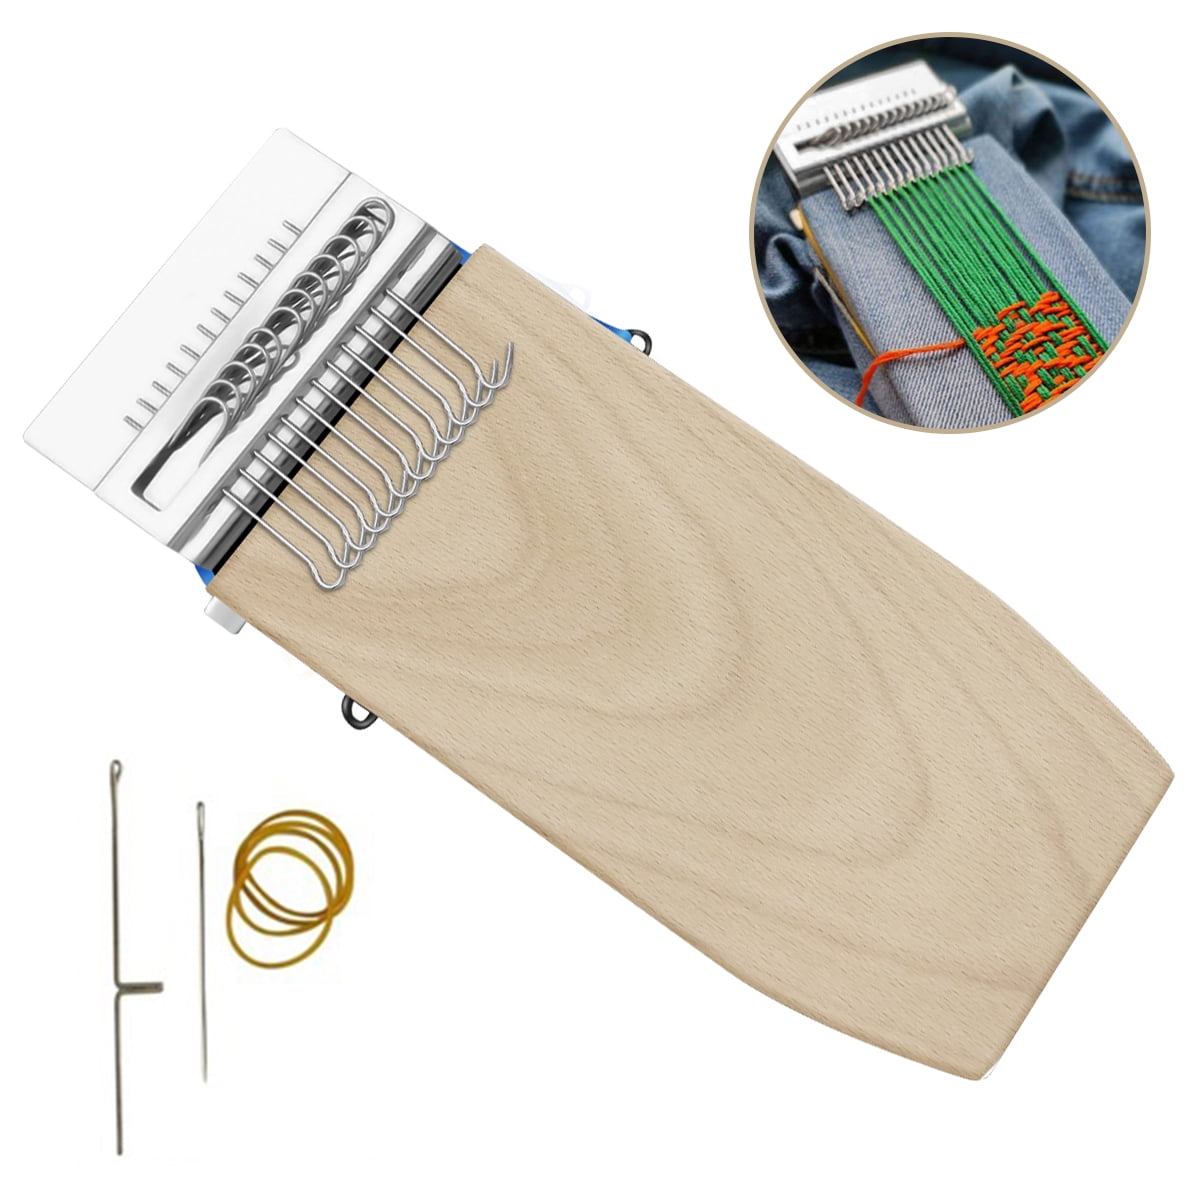 Rumexeng Small Weaving Loom, Wooden Speedweve Darning Loom Type Weave Tool,  Convenient DIY Darning Machine for Mending Jeans and Clothes Quickly and